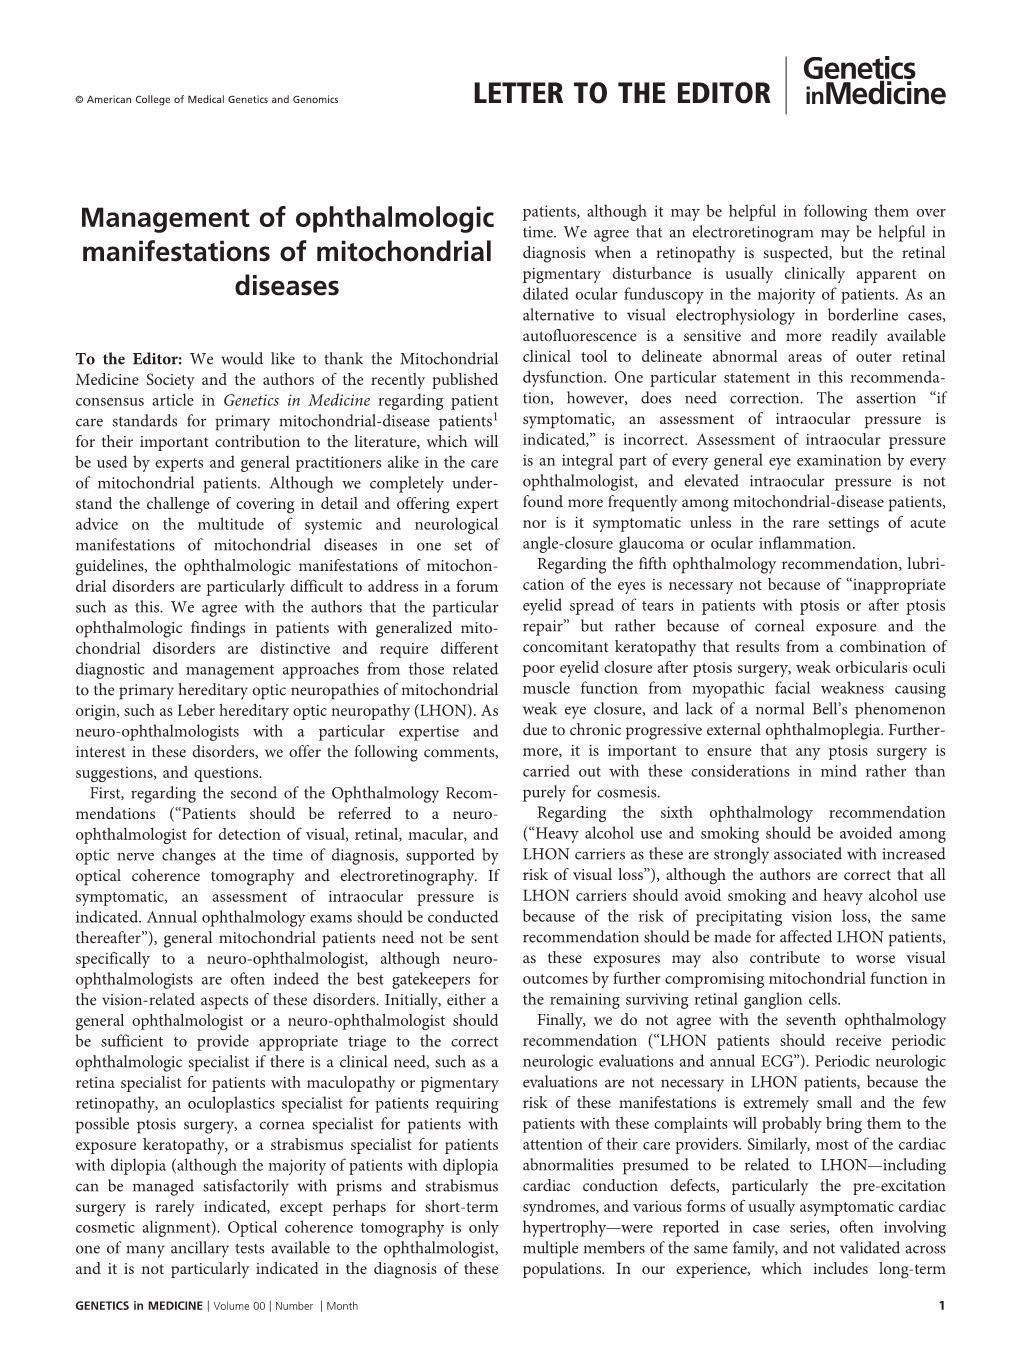 Management of Ophthalmologic Manifestations of Mitochondrial